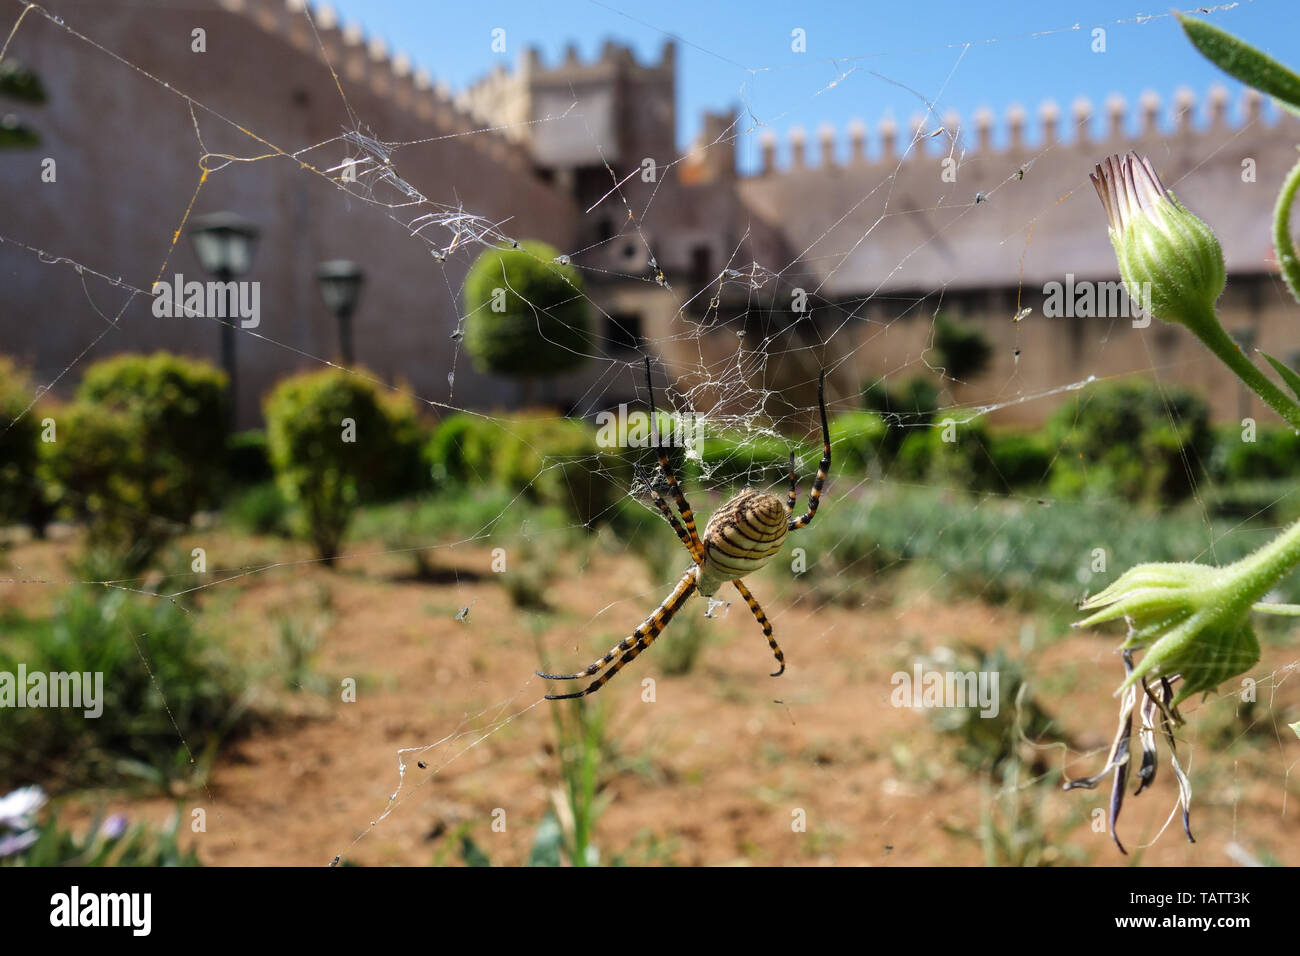 Close-up of a wasp spiter, Argiope bruennichi, sitting in his web with the fortress wall and garden in the old town of Rabat, Morocco Stock Photo